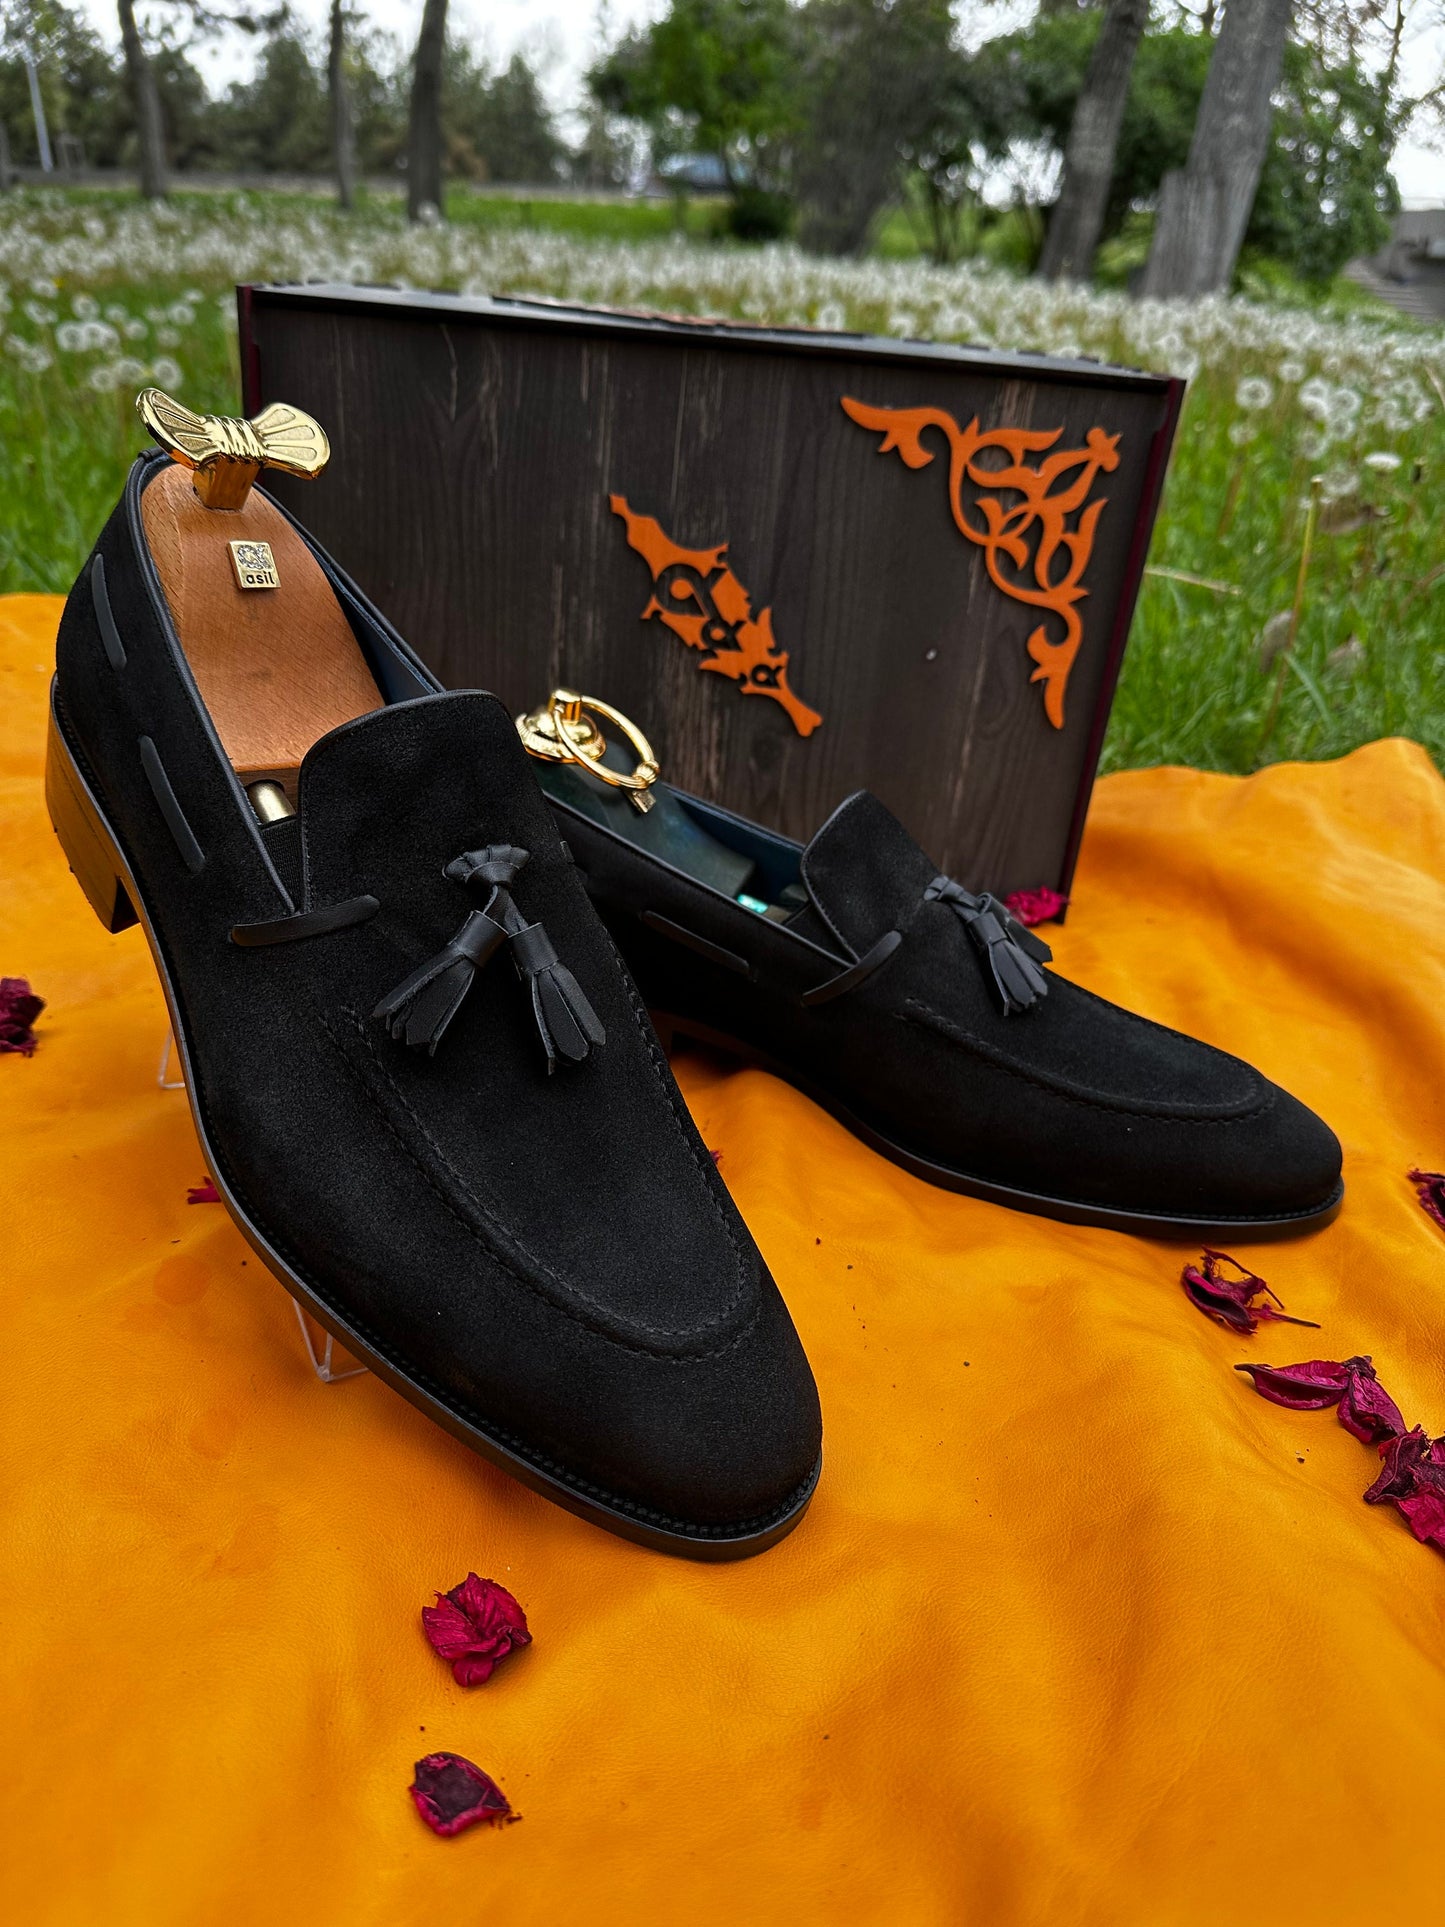 Black Suede Men Dress Shoes Premium Quality Customizable  Luxury Leather Shoes  Made-To-Order Bespoke